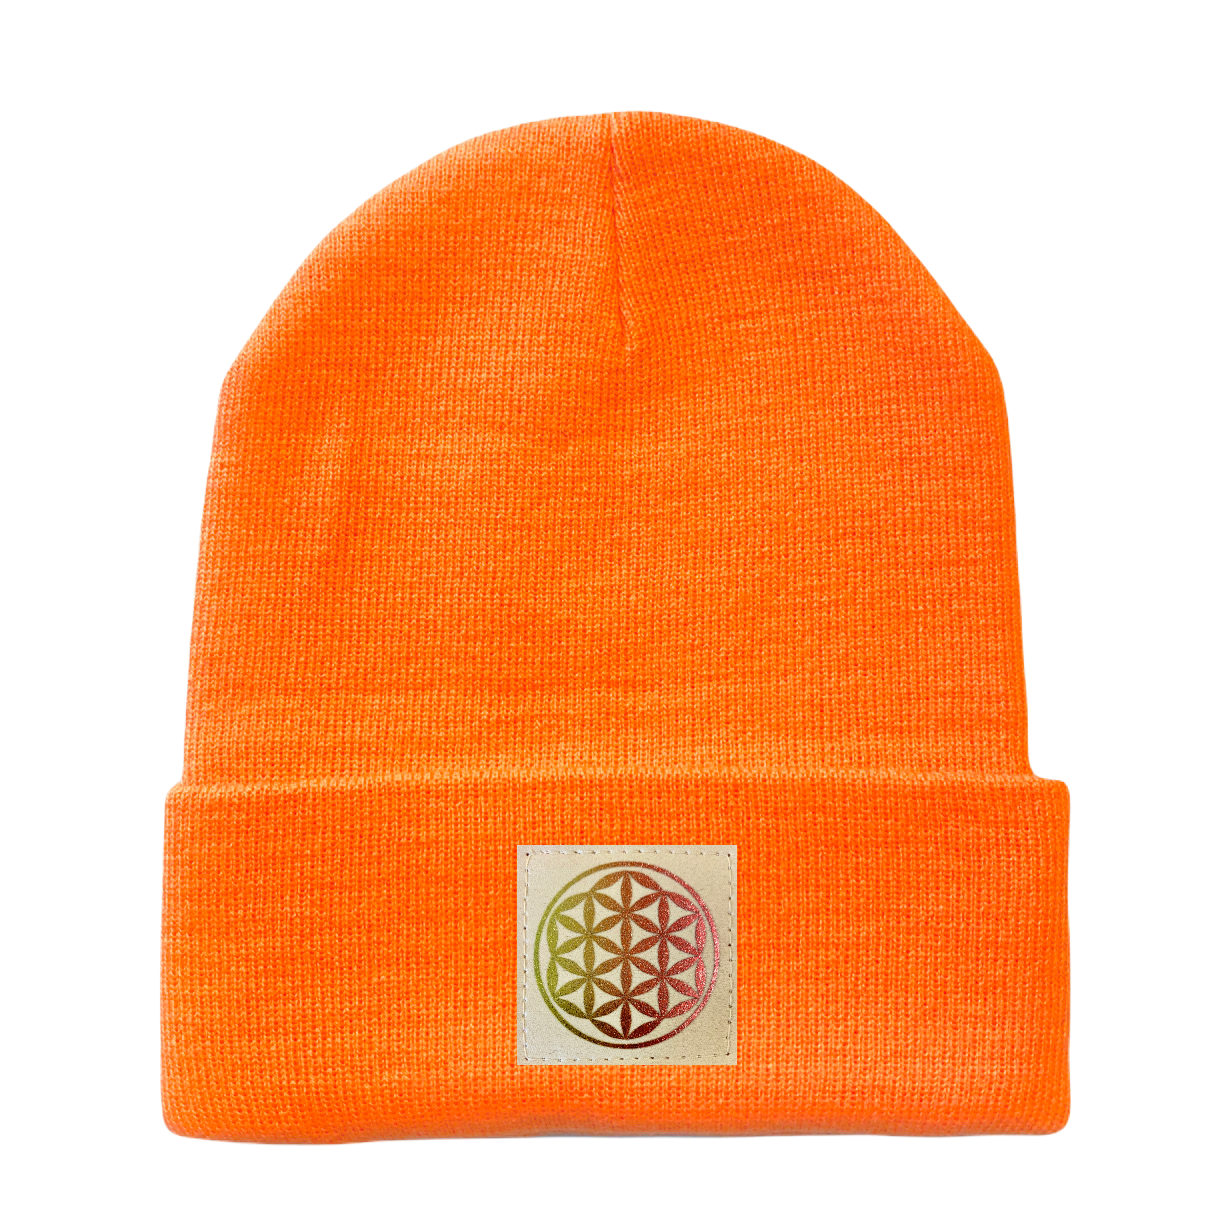 Neon Safety Orange Cuffed Beanie with Hand Made Vegan Leather Holographic Flower of Life over your Third eye, sacred geometry hat  by Buddha Gear 